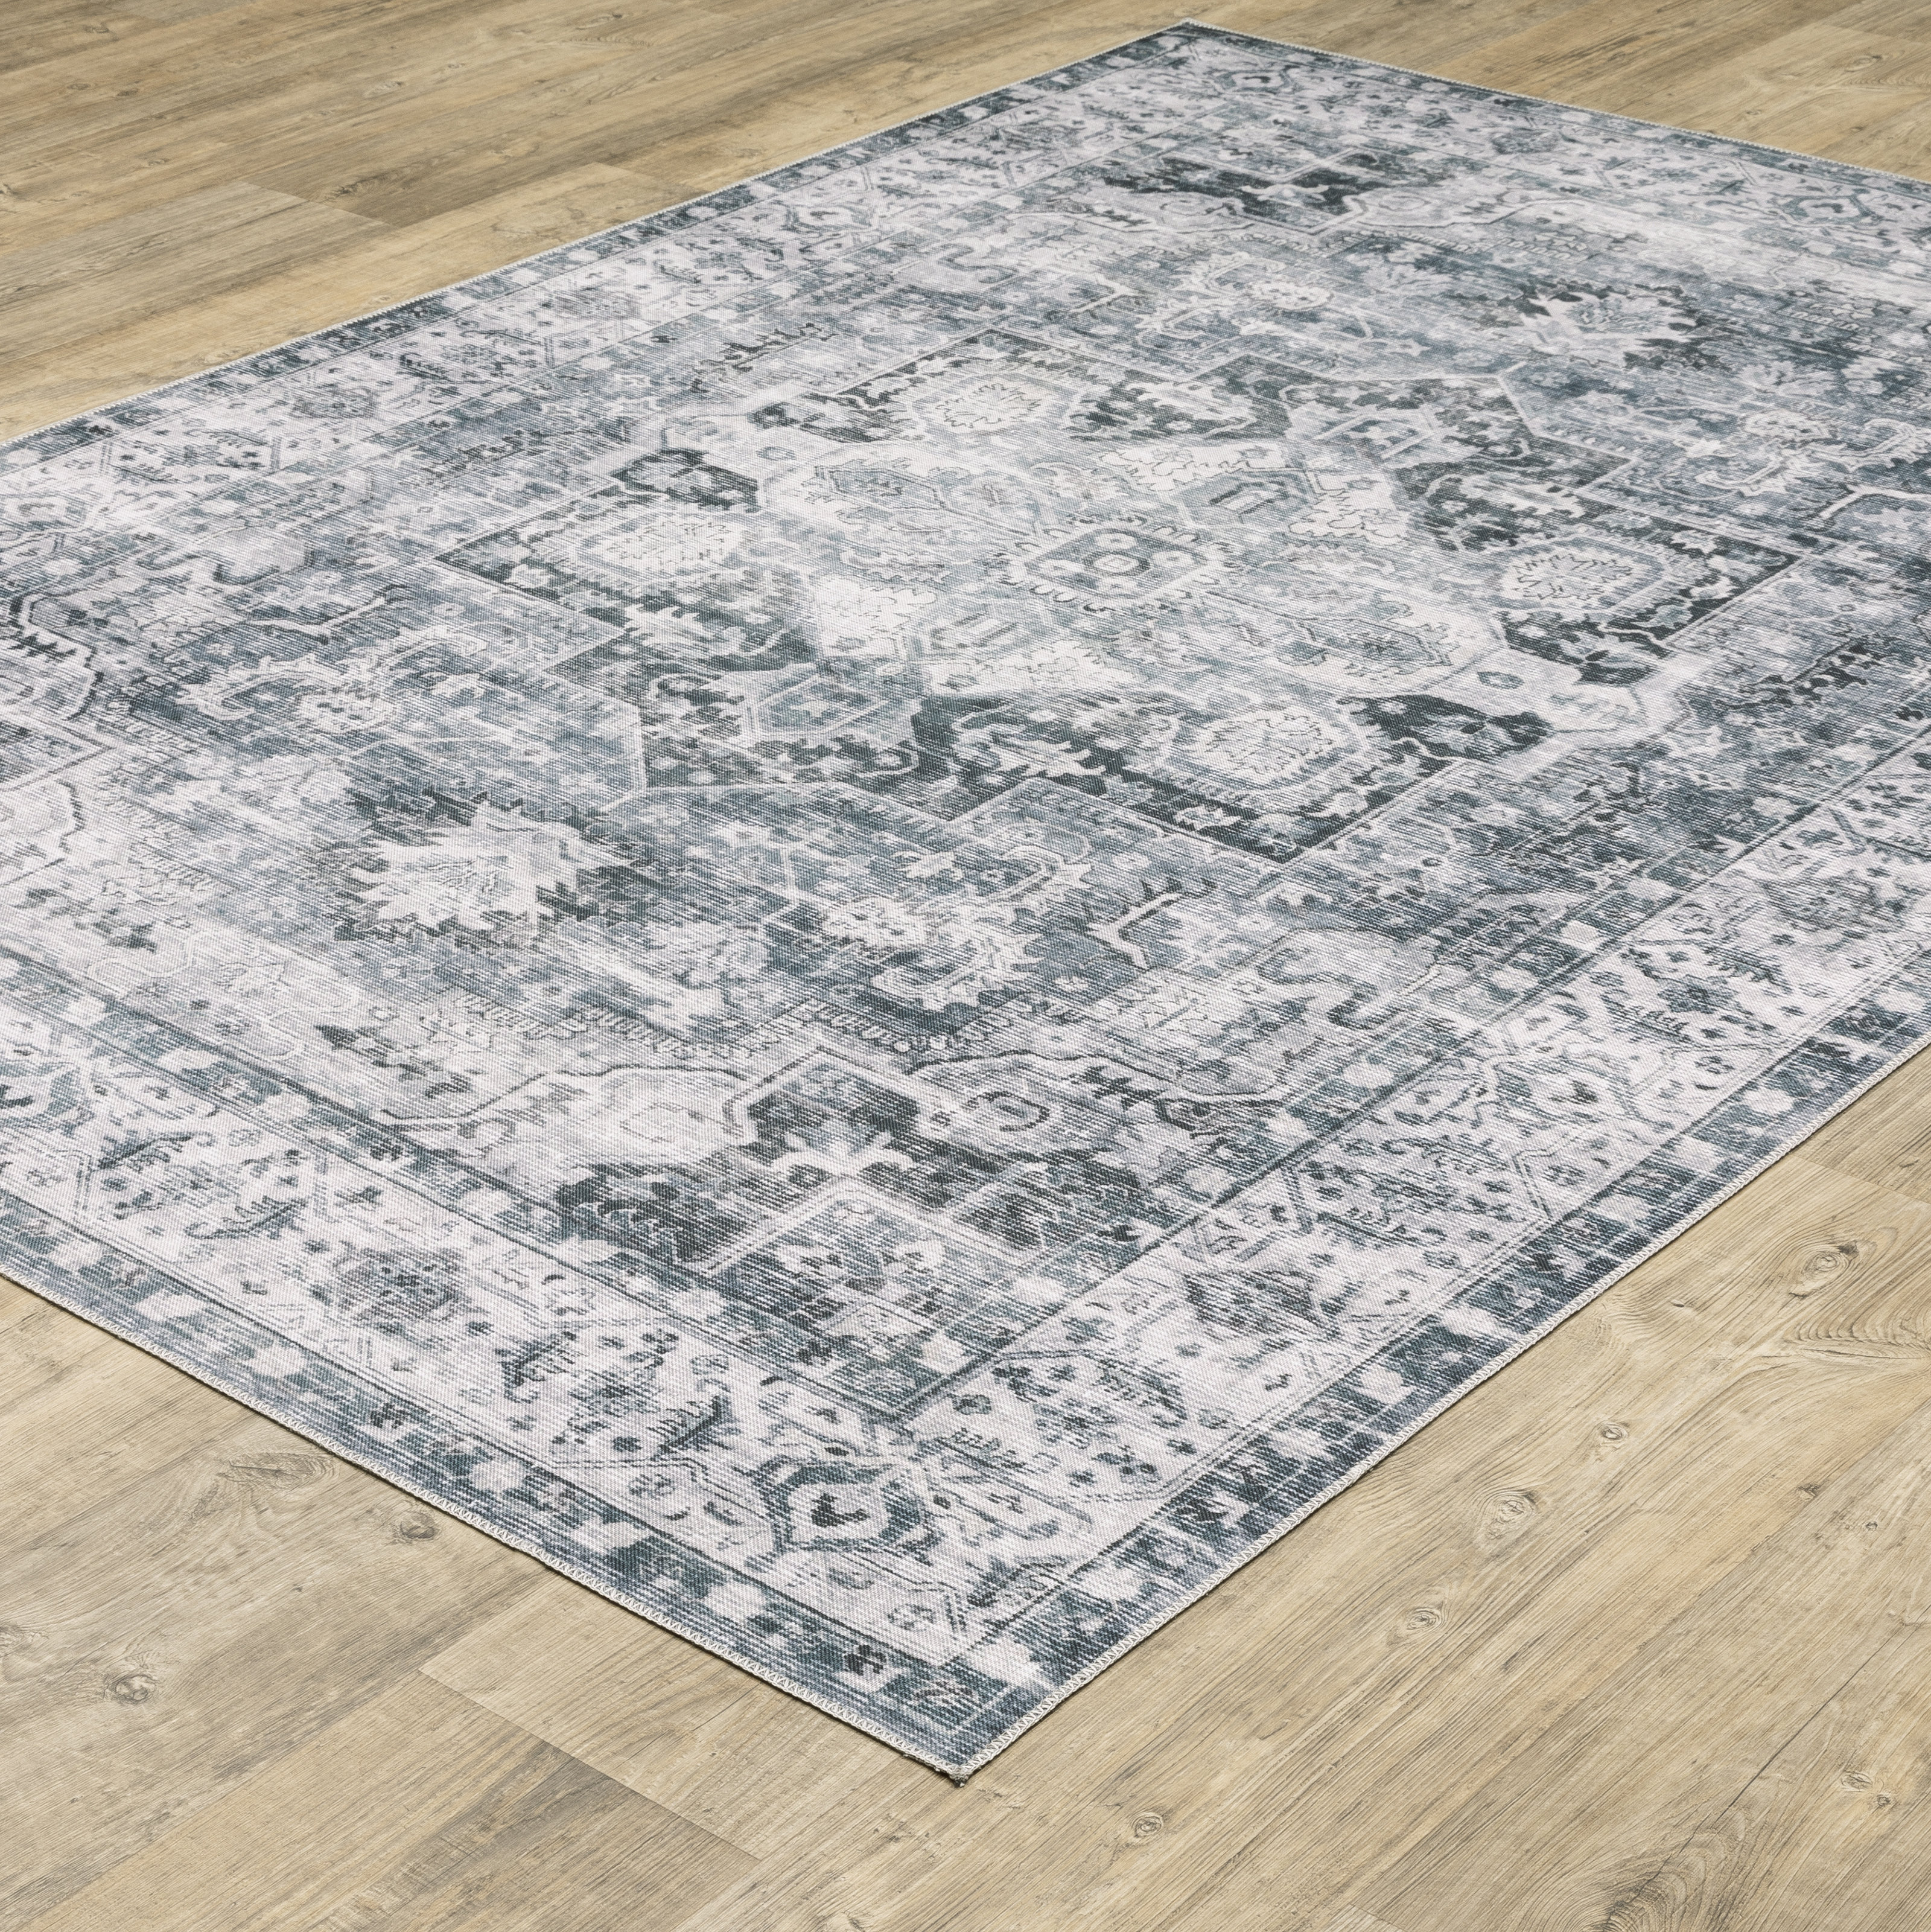  Area Rug Living Room Carpet: 5x7 Large Moroccan Soft Fluffy  Geometric Washable Bedroom Rugs Dining Room Home Office Nursery Low Pile  Decor Under Kitchen Table Blue/Ivory : Home & Kitchen